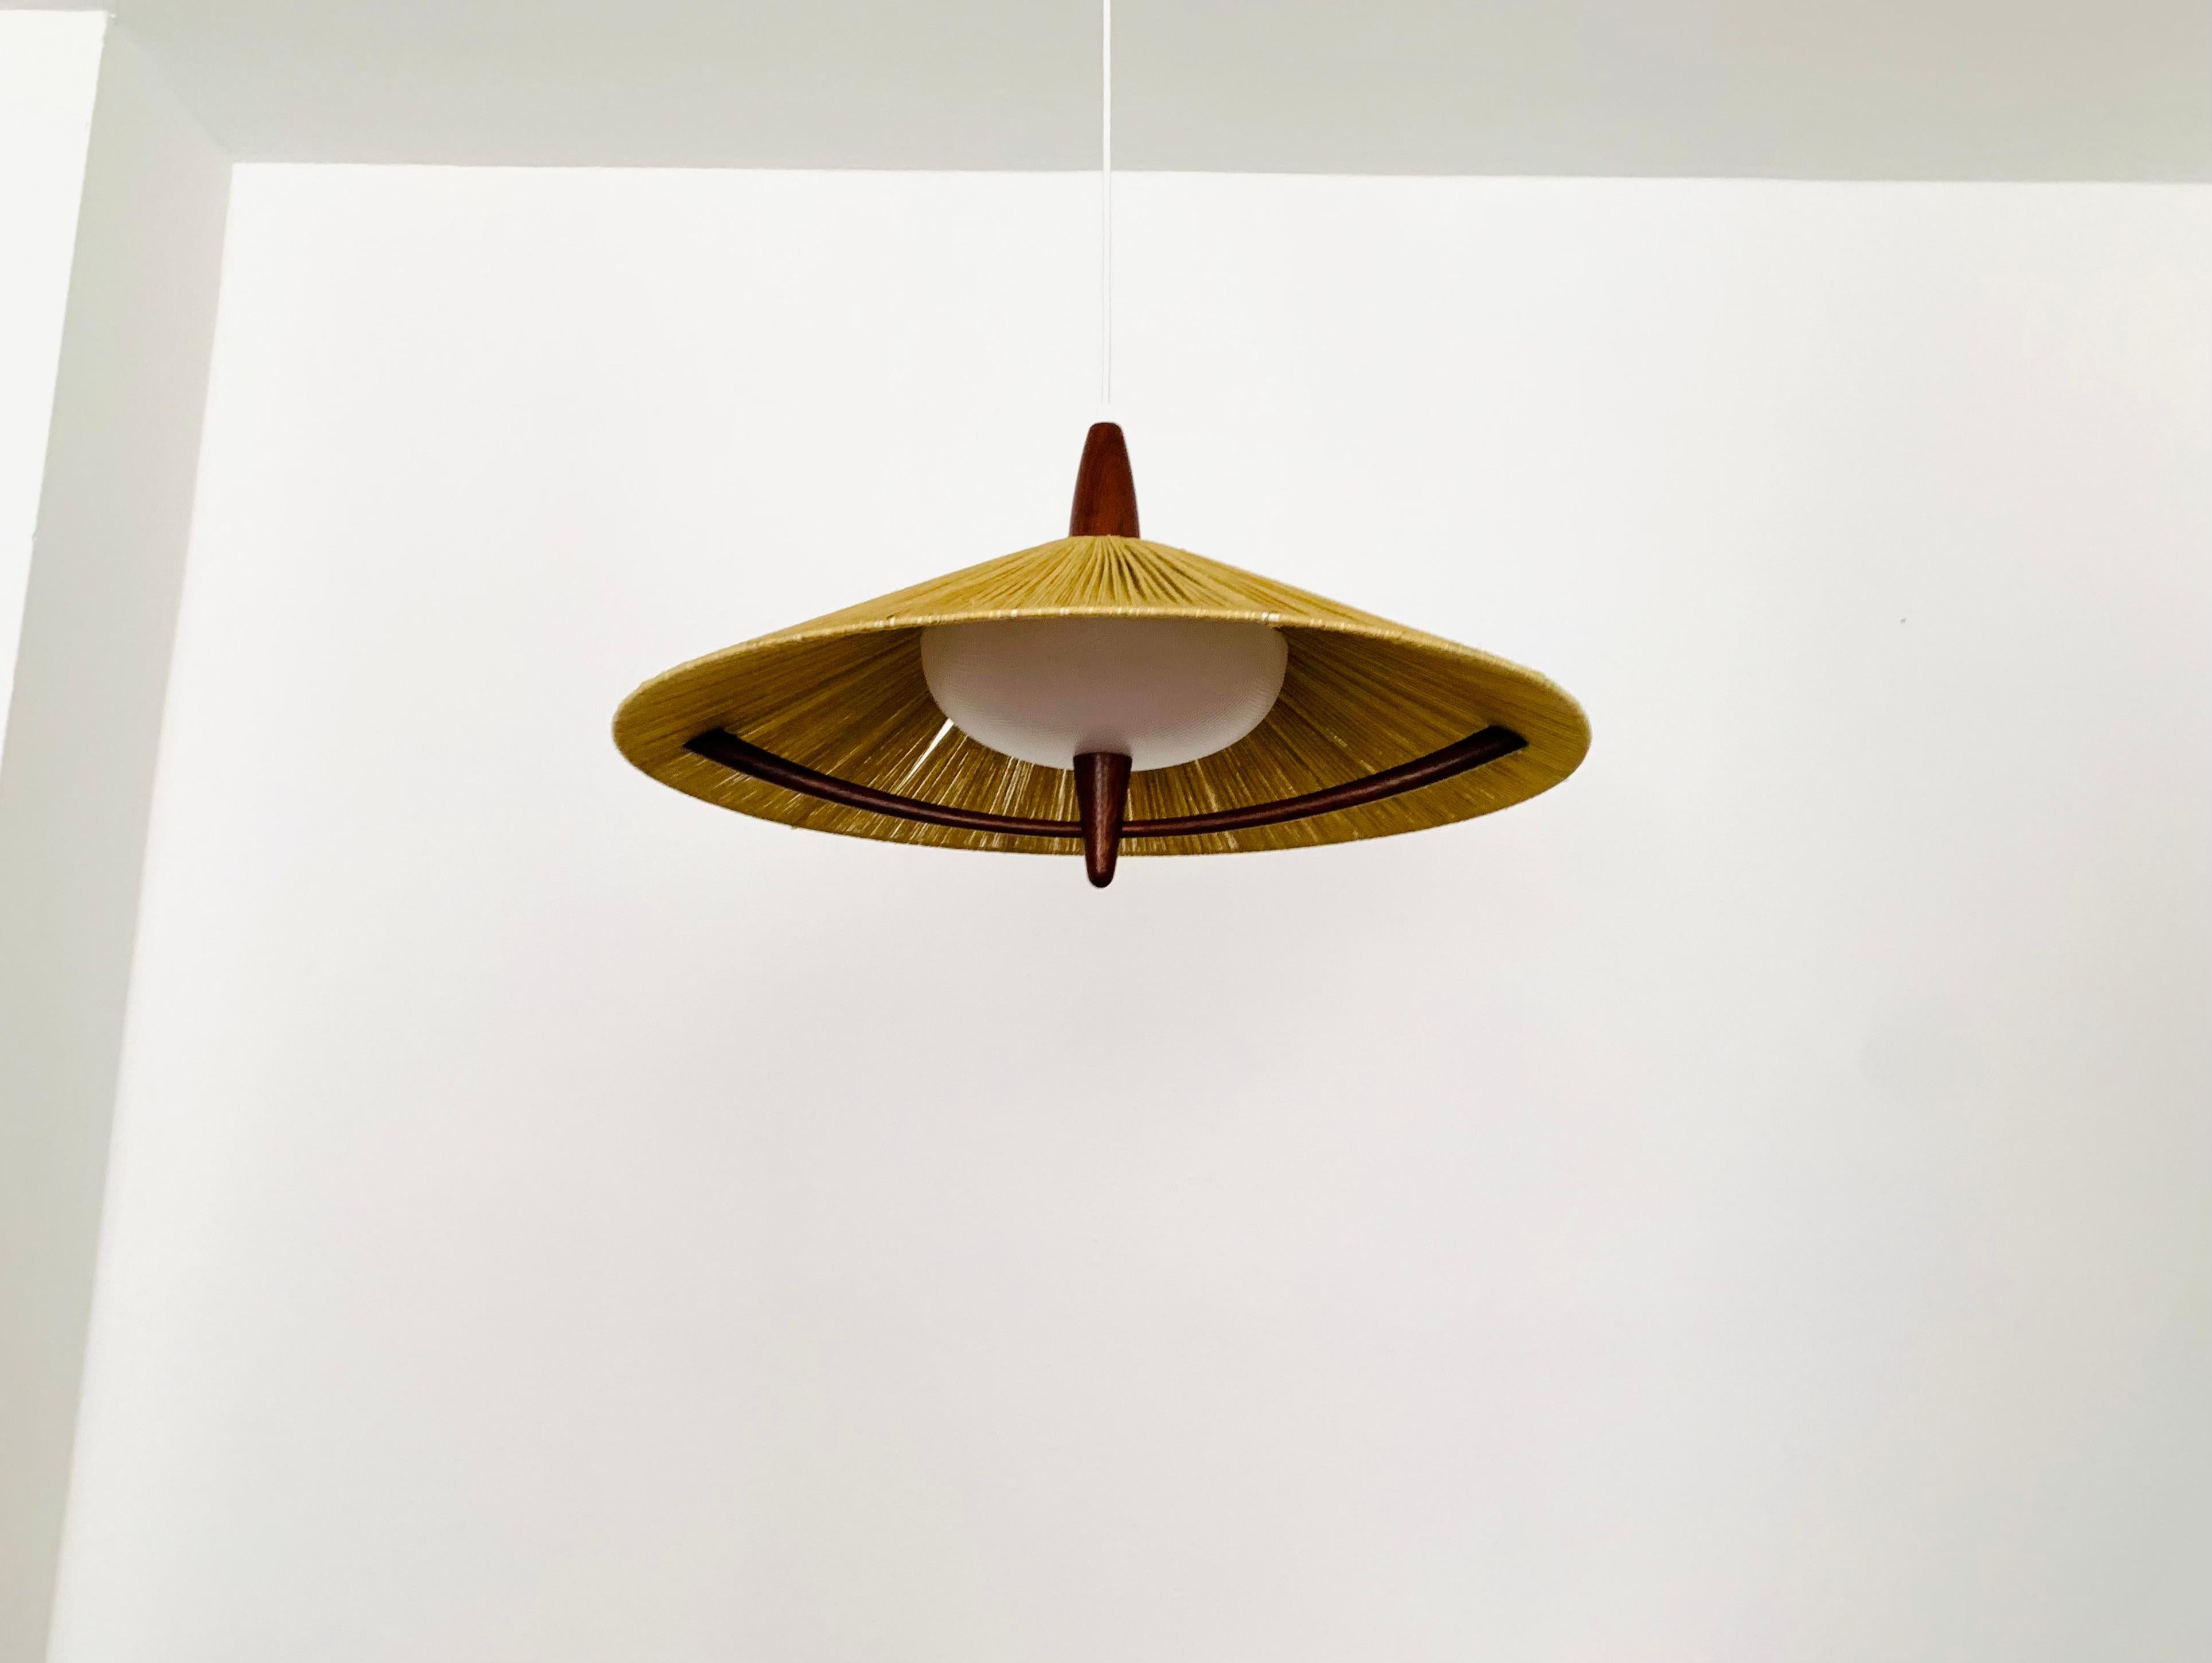 Exceptionally beautiful and very large pendant light from the 1960s.
The design is very unusual.
The shape and the materials create a warm and very pleasant light.
The teak details are beautifully shaped.

Condition:

Good vintage condition